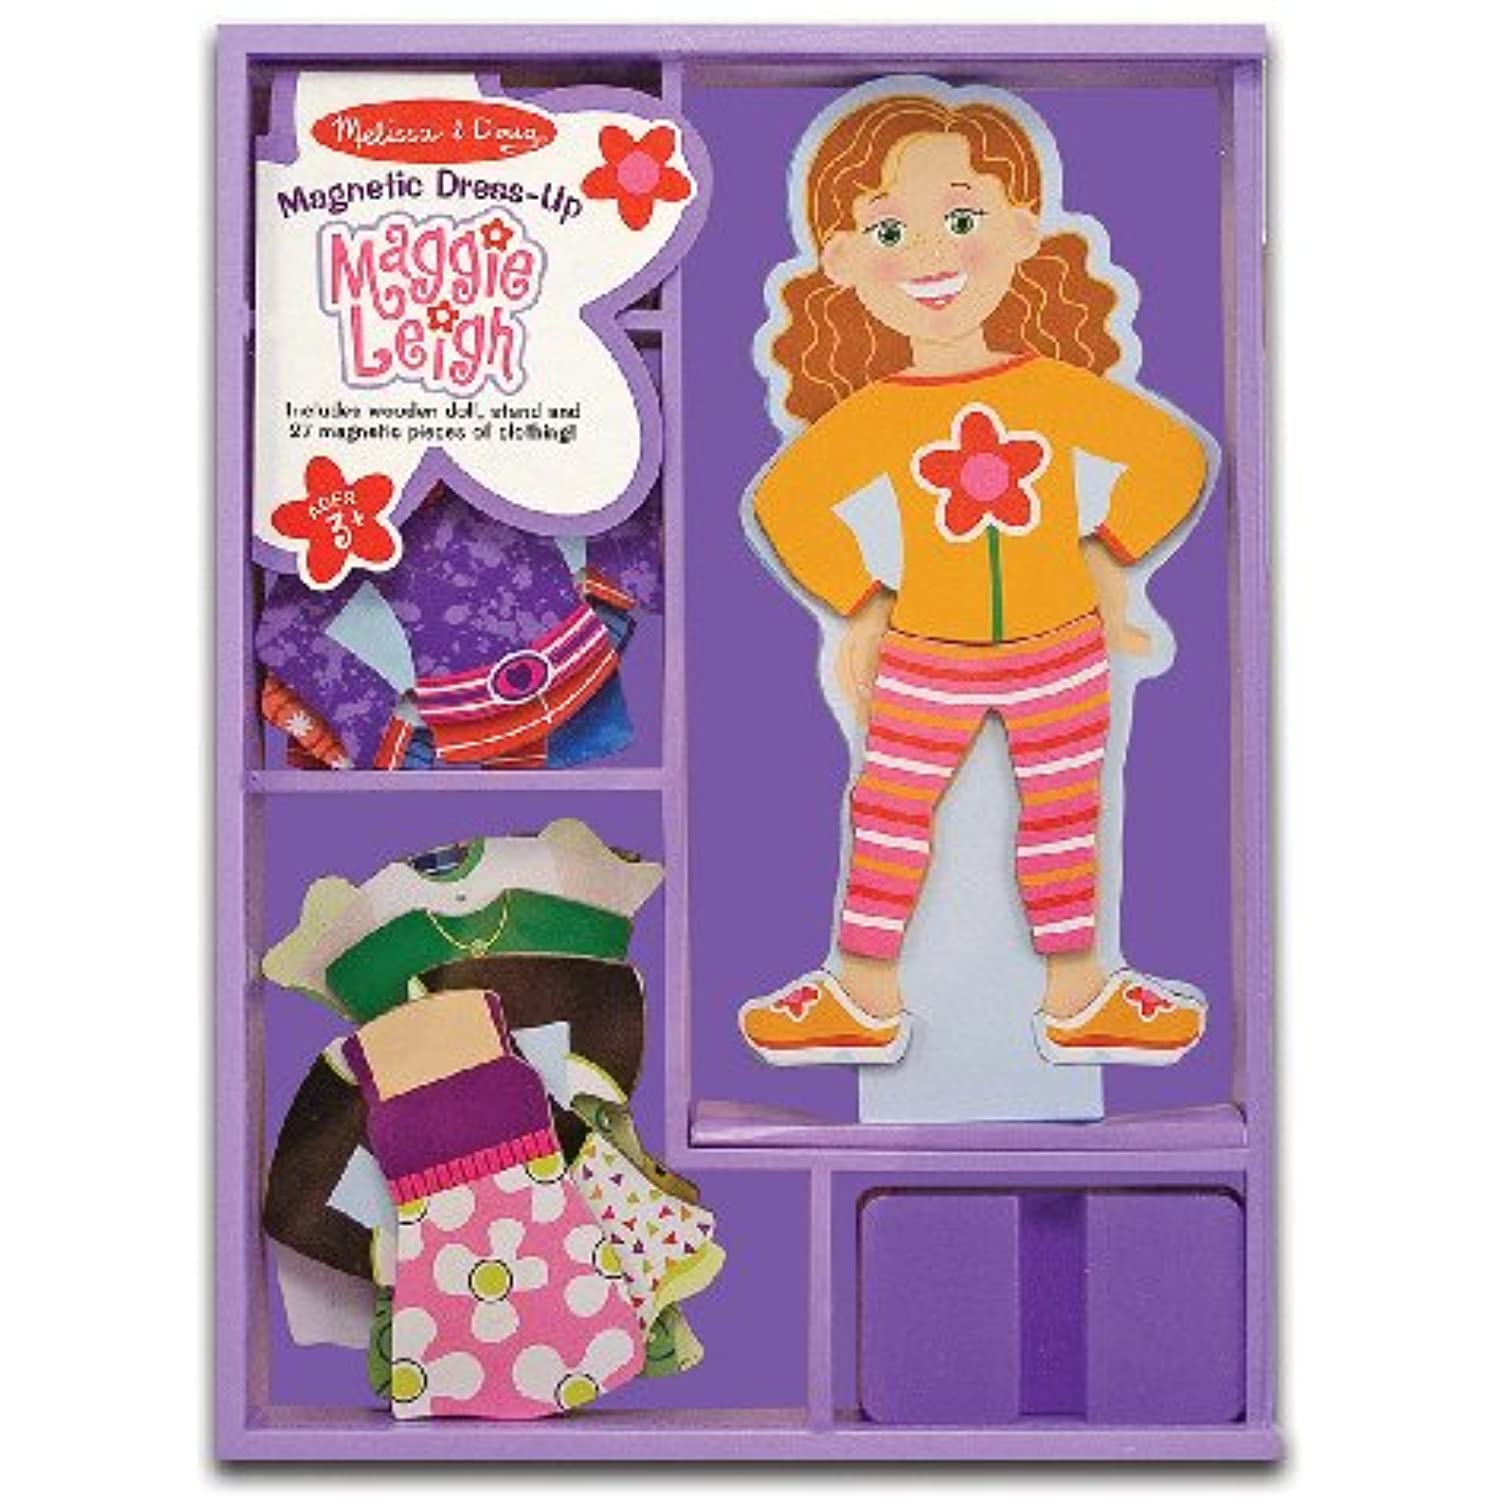 Melissa & Doug Maggie Leigh - Magnetic Dress Up Wooden Doll & Stand & 1 Scratch Art Mini-Pad Bundle (03552)